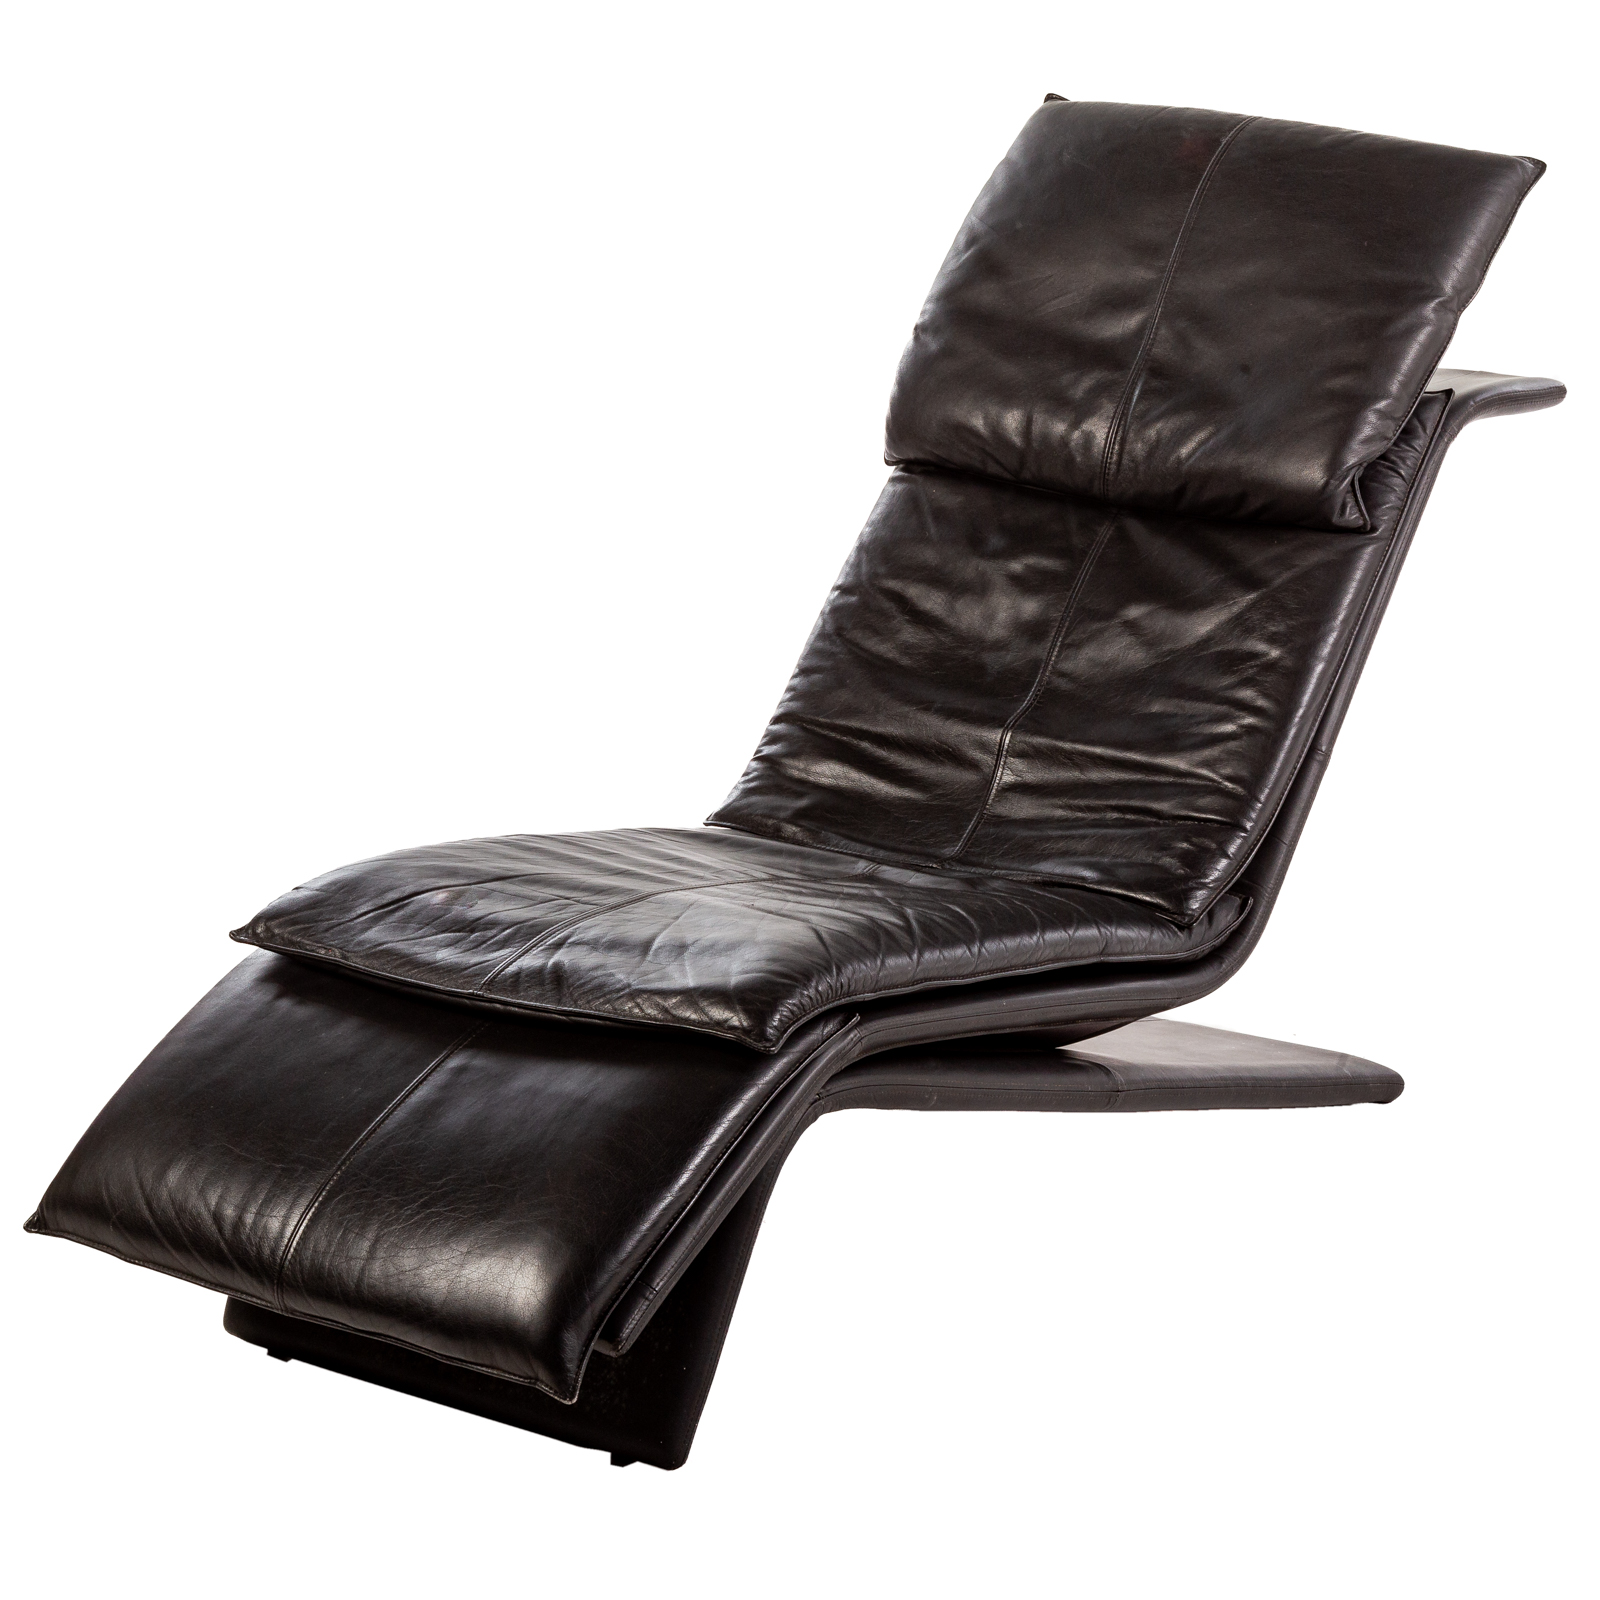 LEATHER CHAISE LOUNGE ATTR MAURICE 3387ca